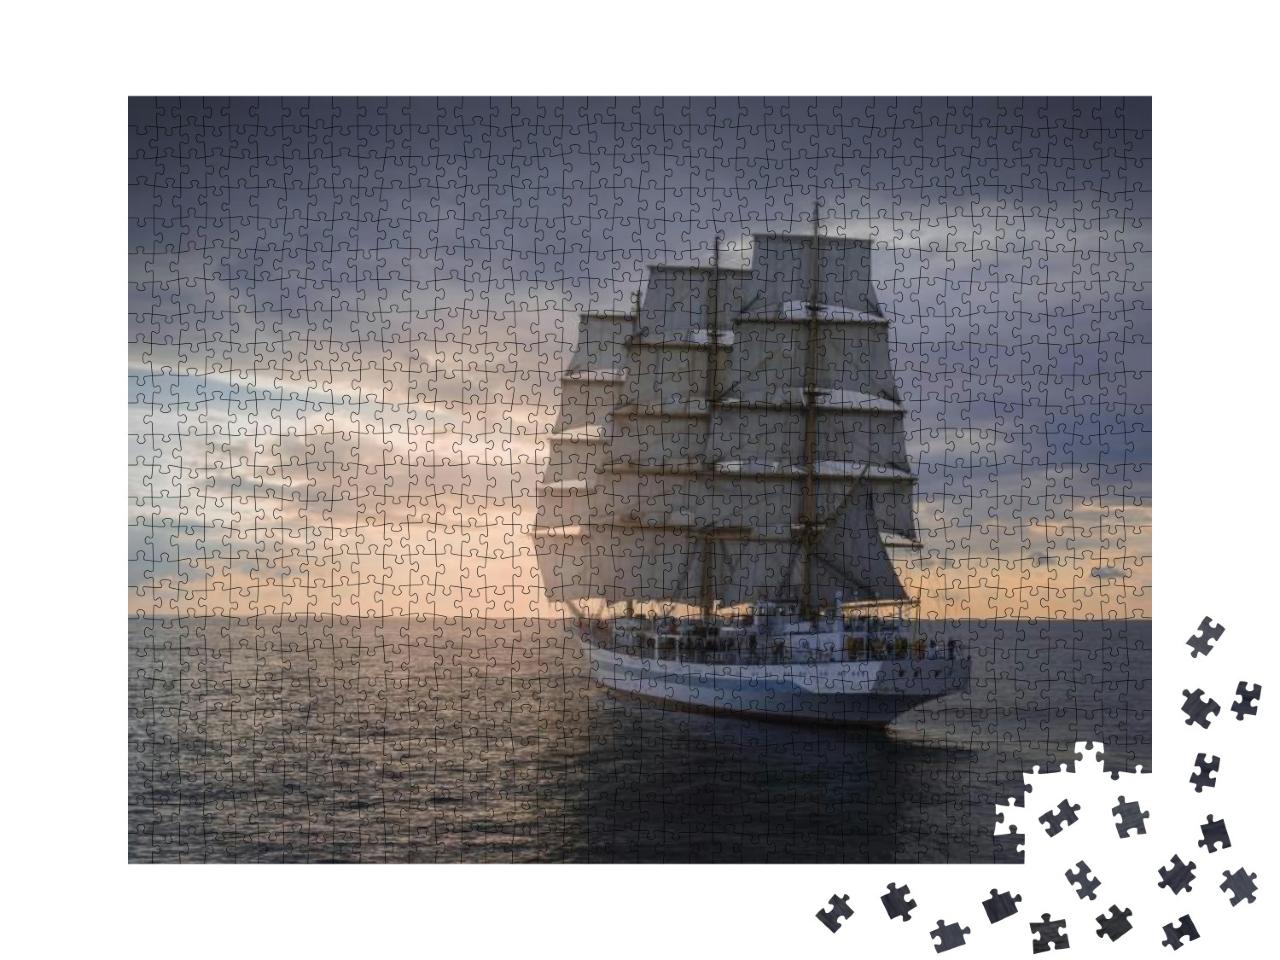 Ancient Sailing Ship in the Sea... Jigsaw Puzzle with 1000 pieces